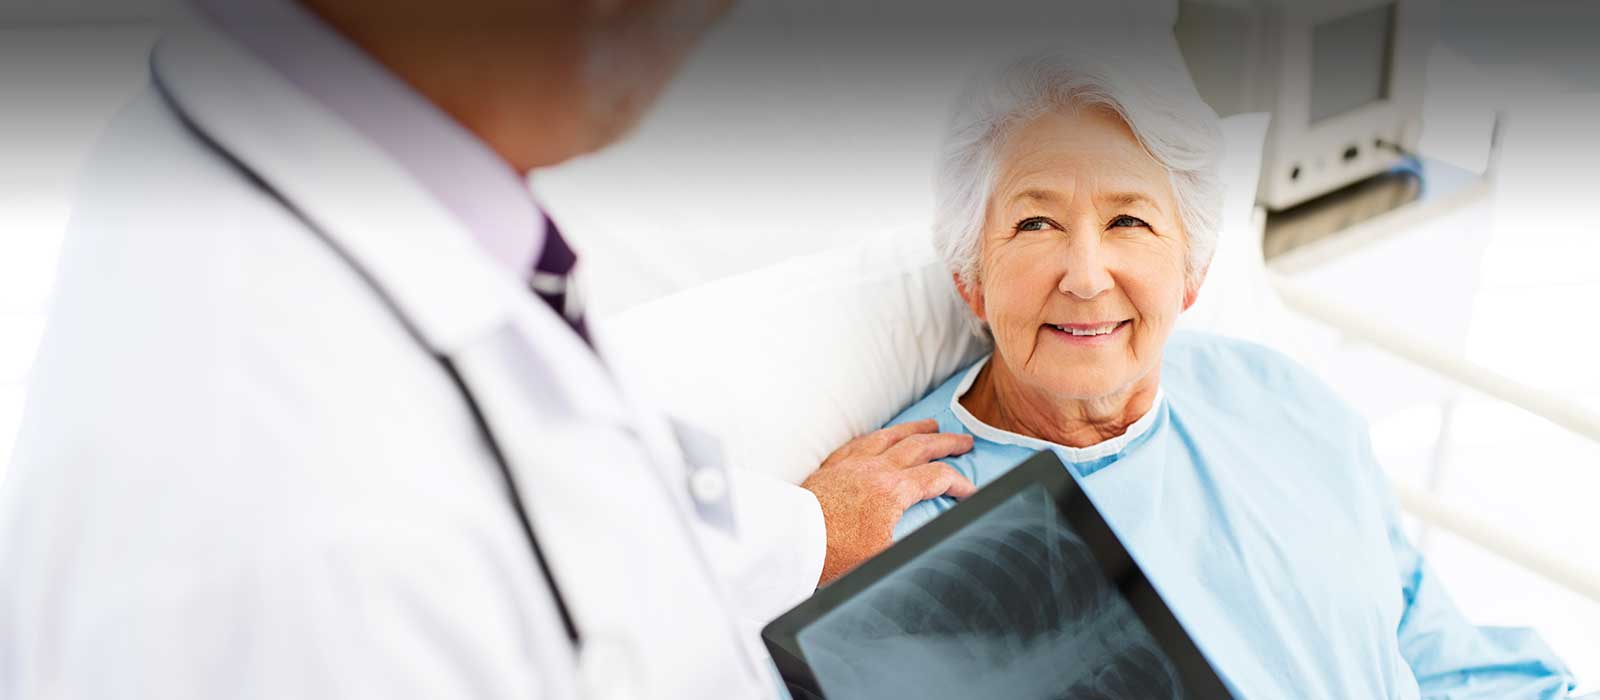 Mature female patient reviewing scan with doctor.